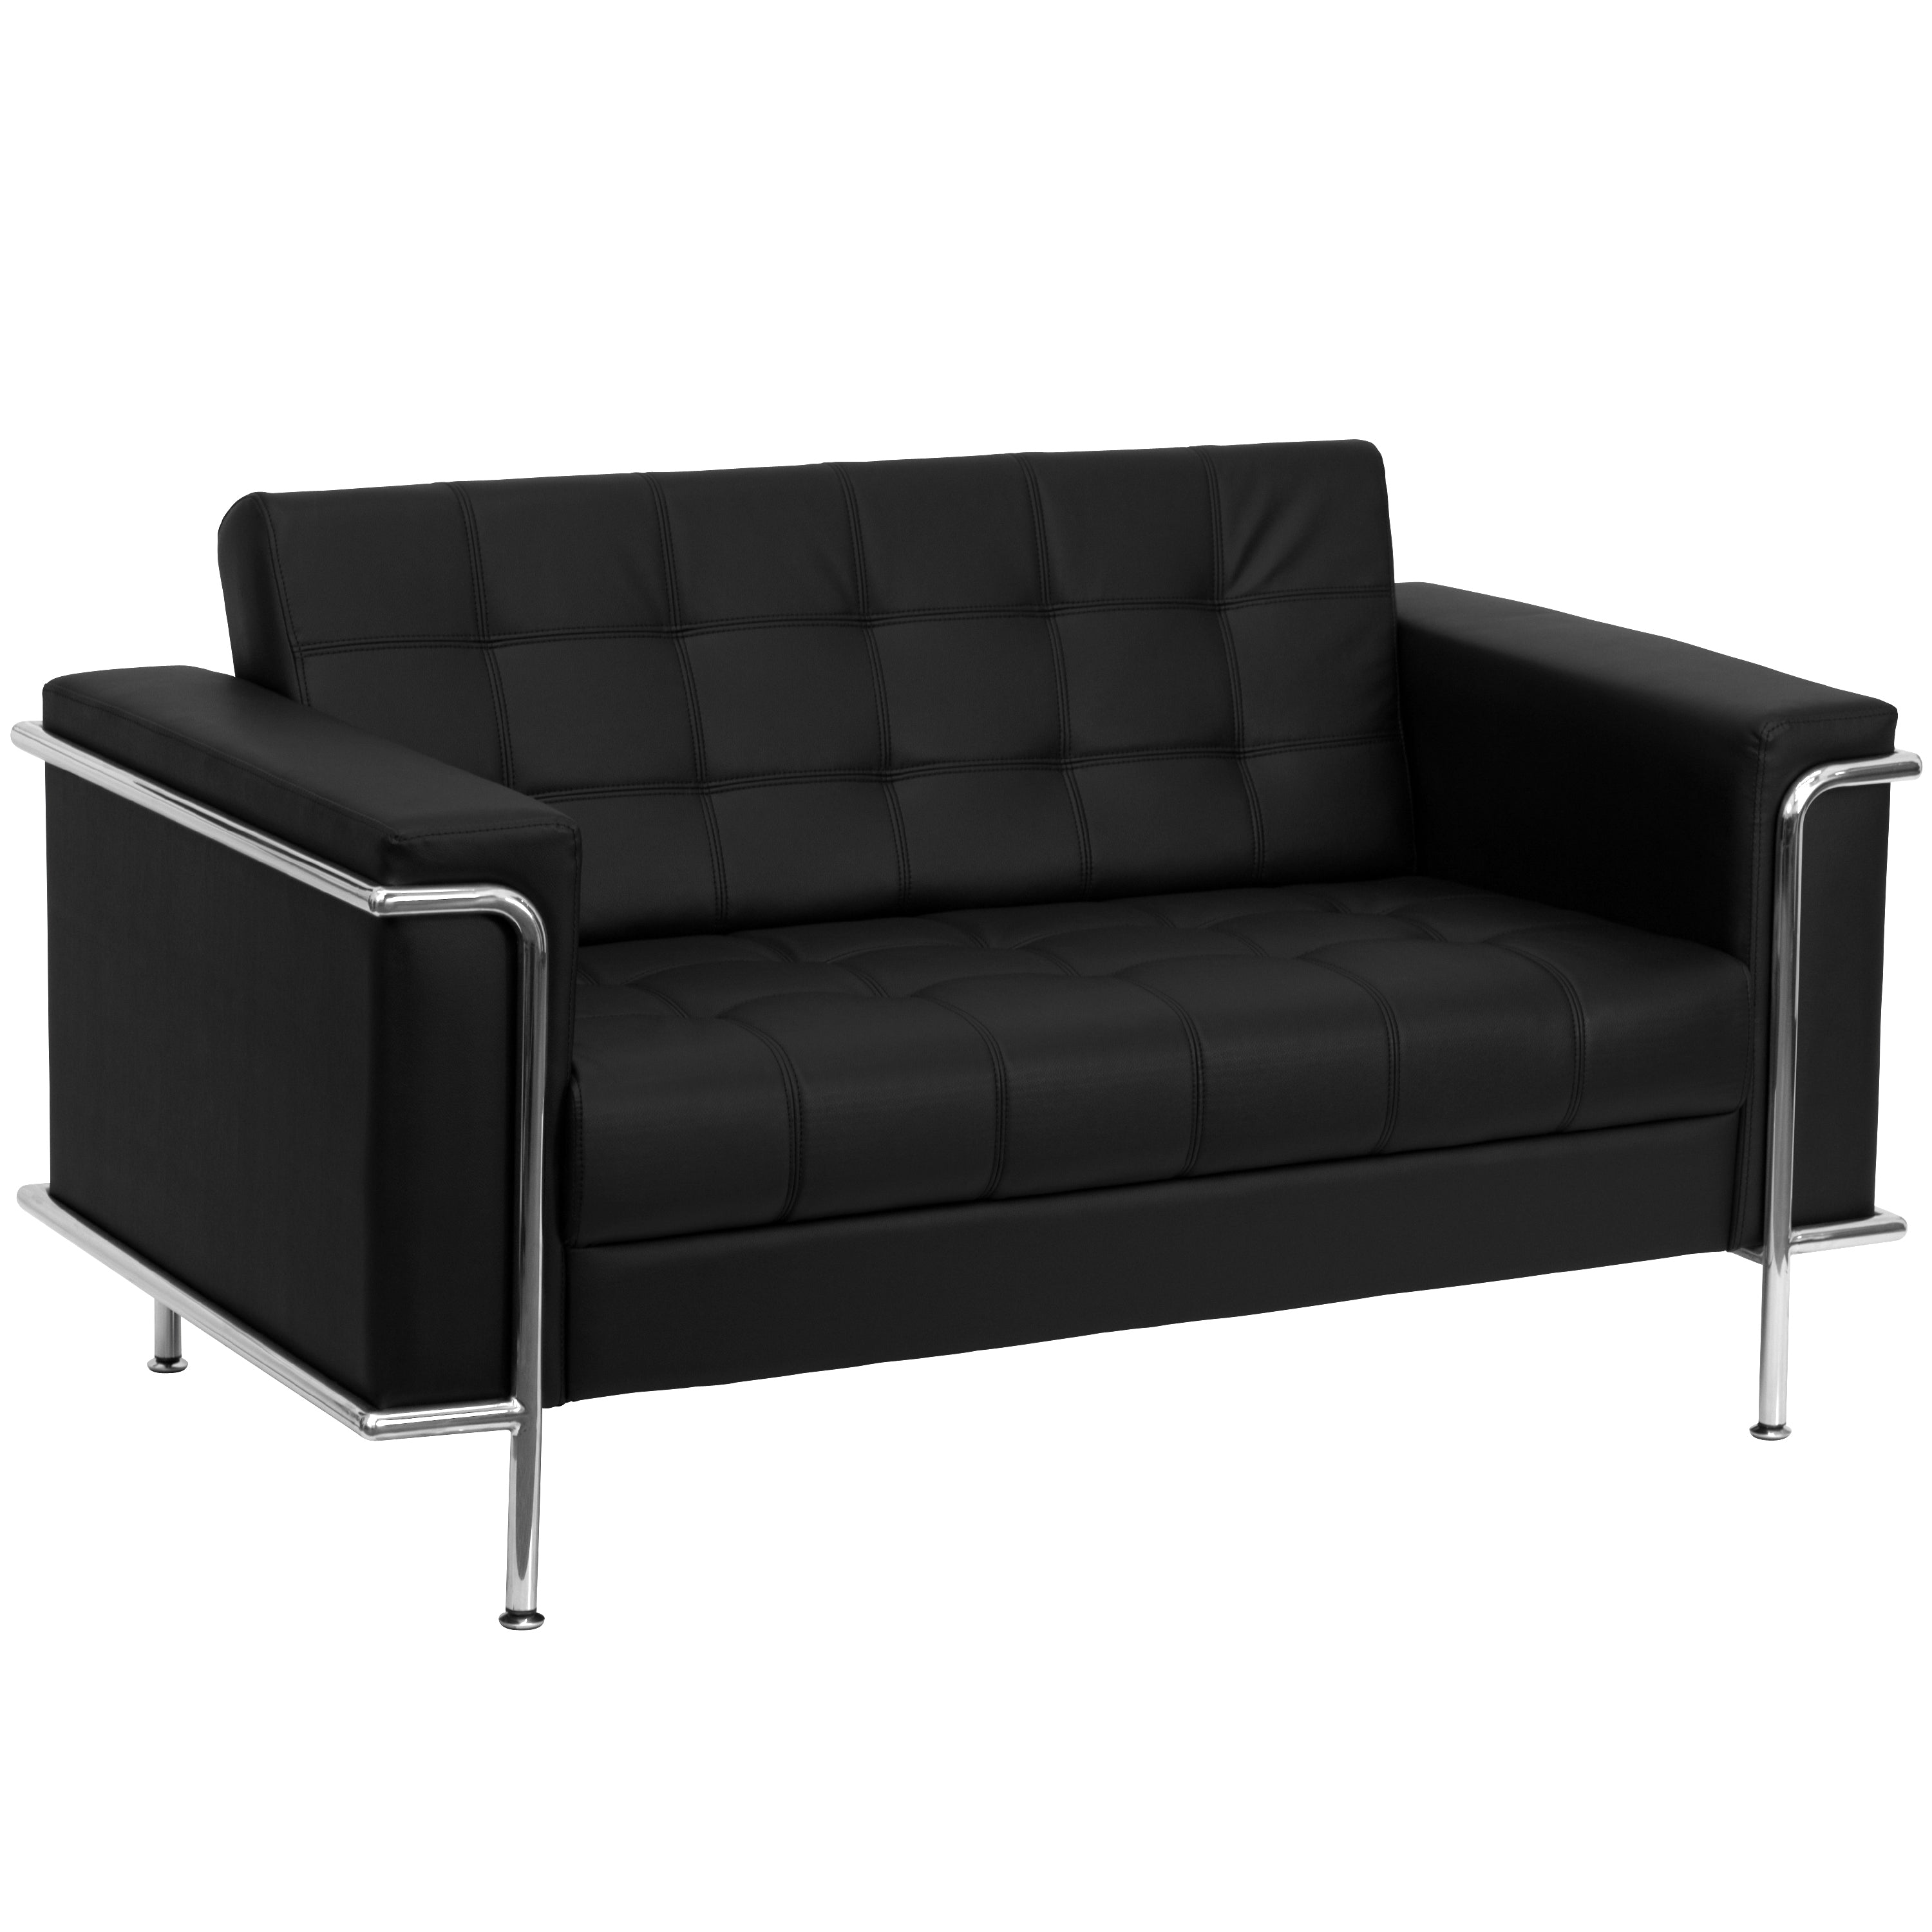 HERCULES Lesley Series Contemporary LeatherSoft Double Stitch Detail Loveseat with Encasing Frame-Reception Loveseat-Flash Furniture-Wall2Wall Furnishings